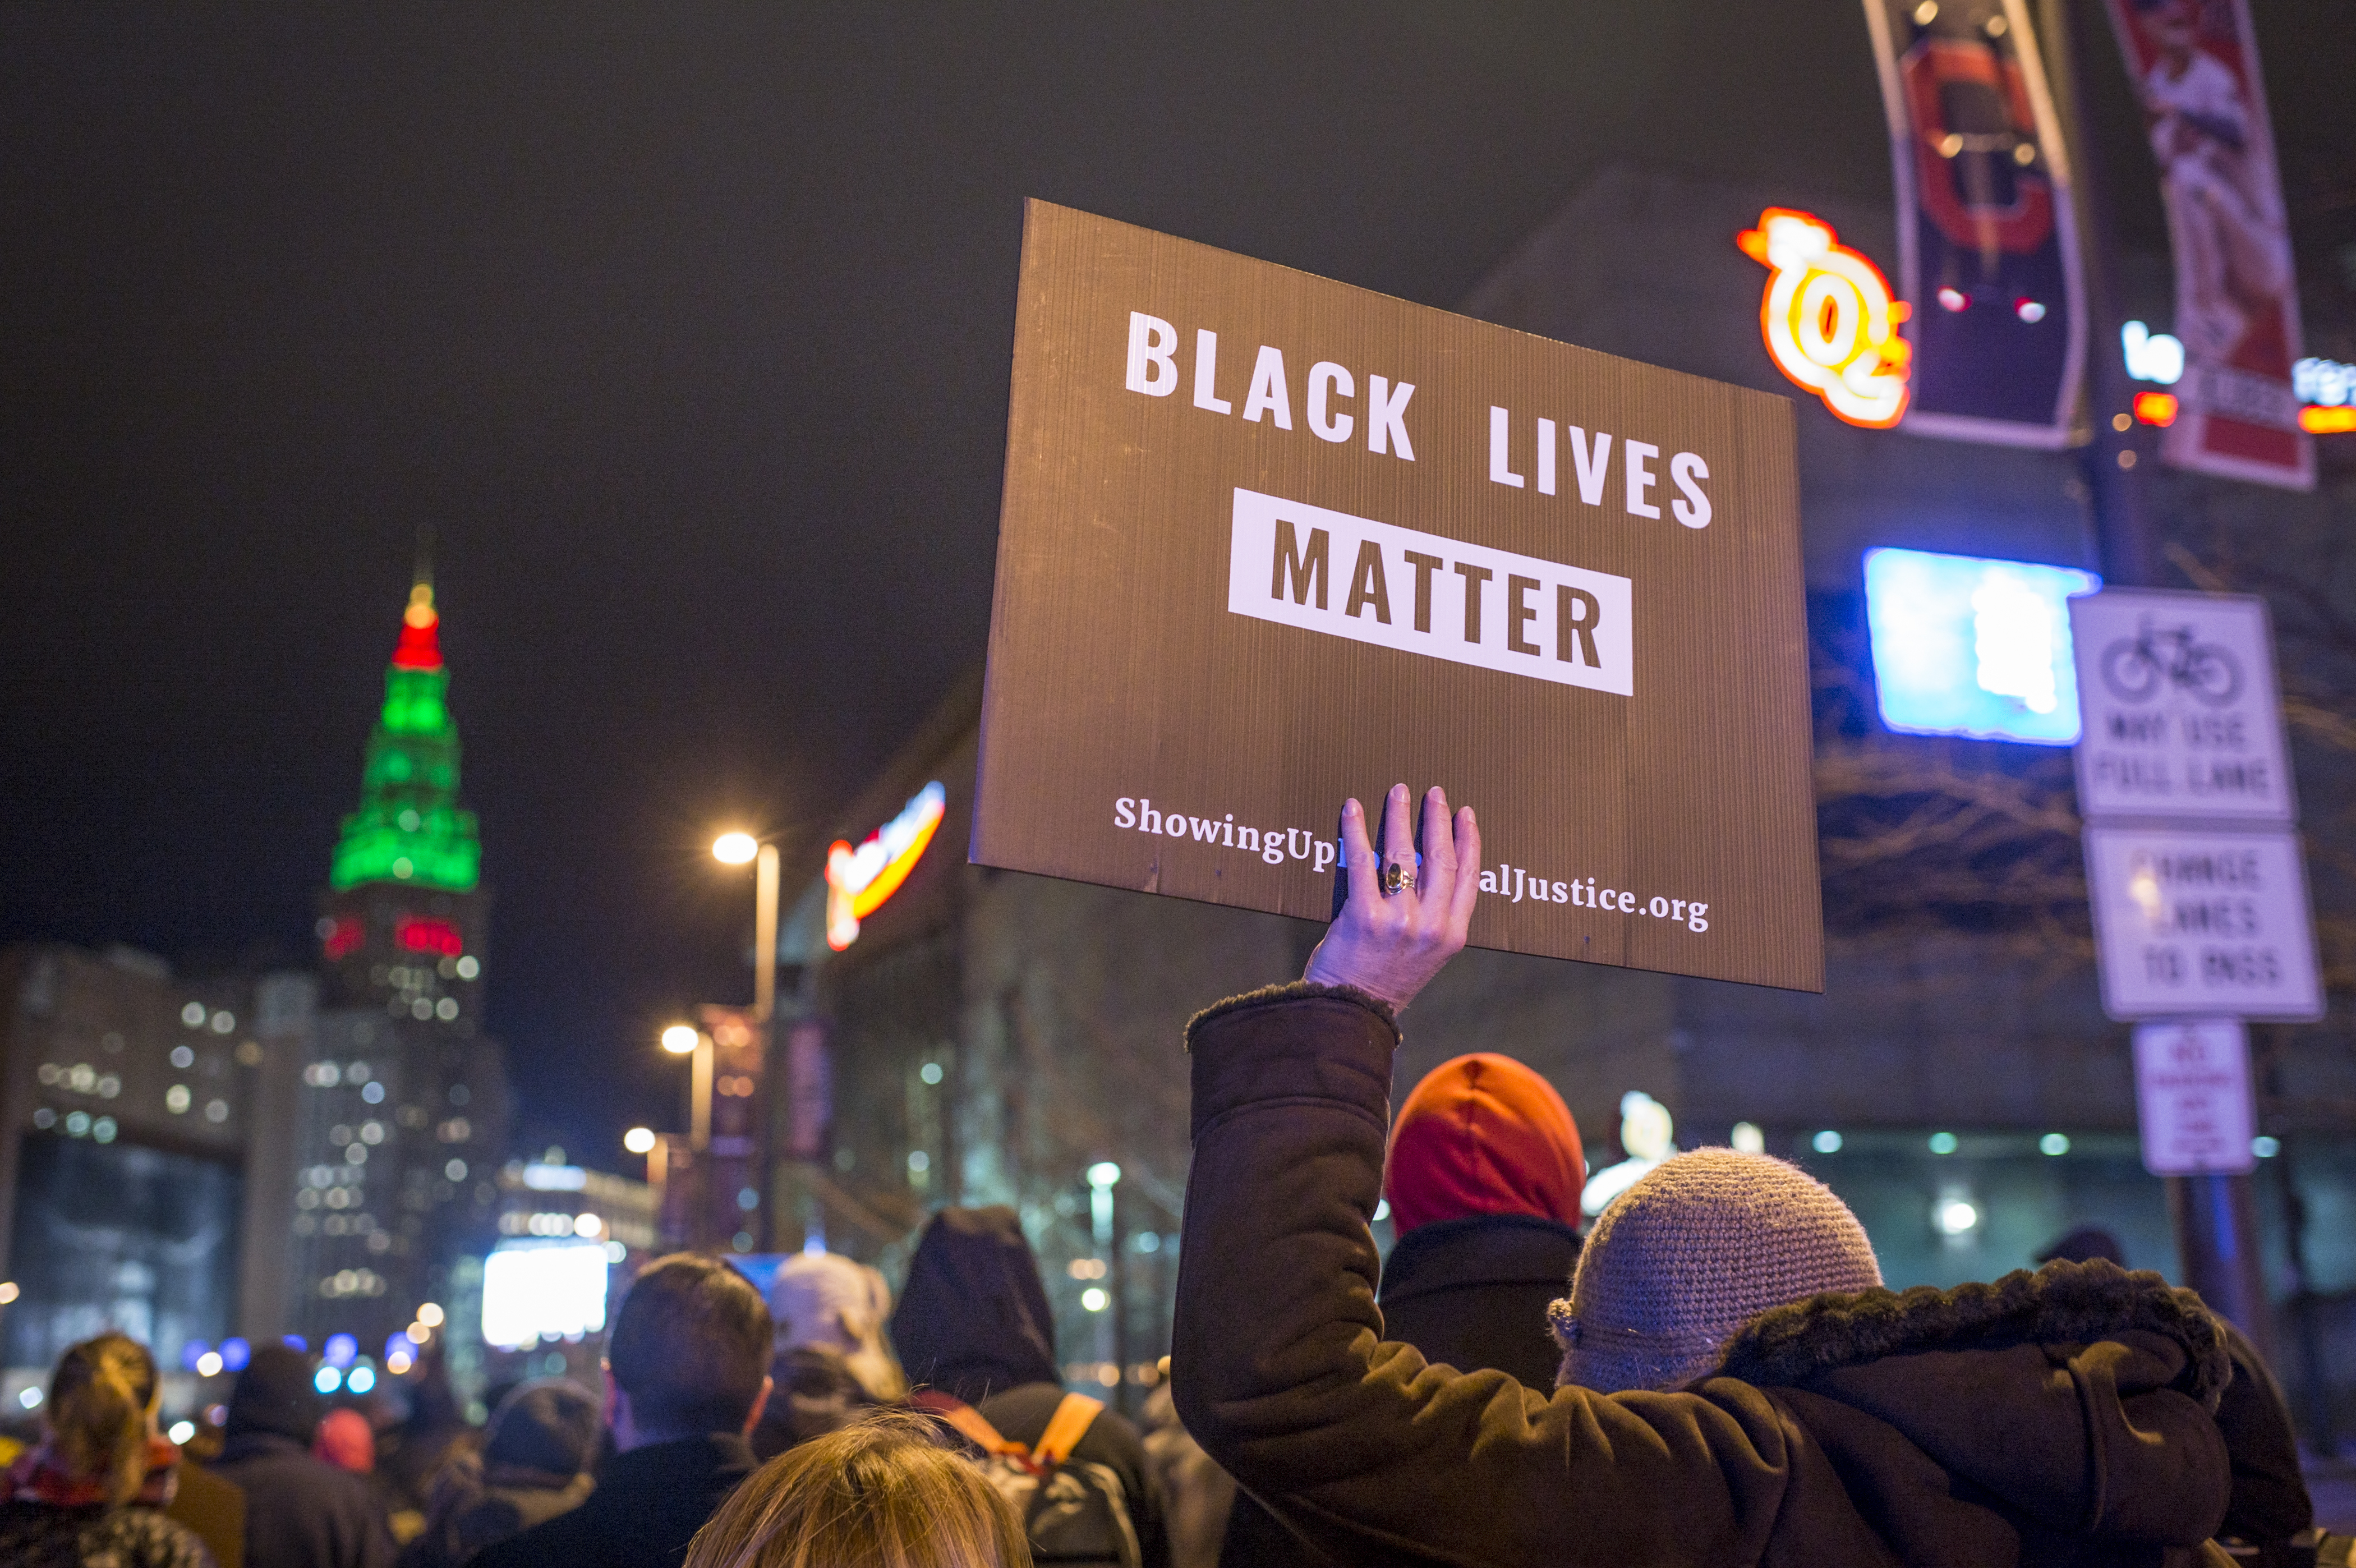 Demonstrators march on Ontario St. in Cleveland, Ohio, on Dec. 29, 2015 (Angelo Merendino—Getty Images)